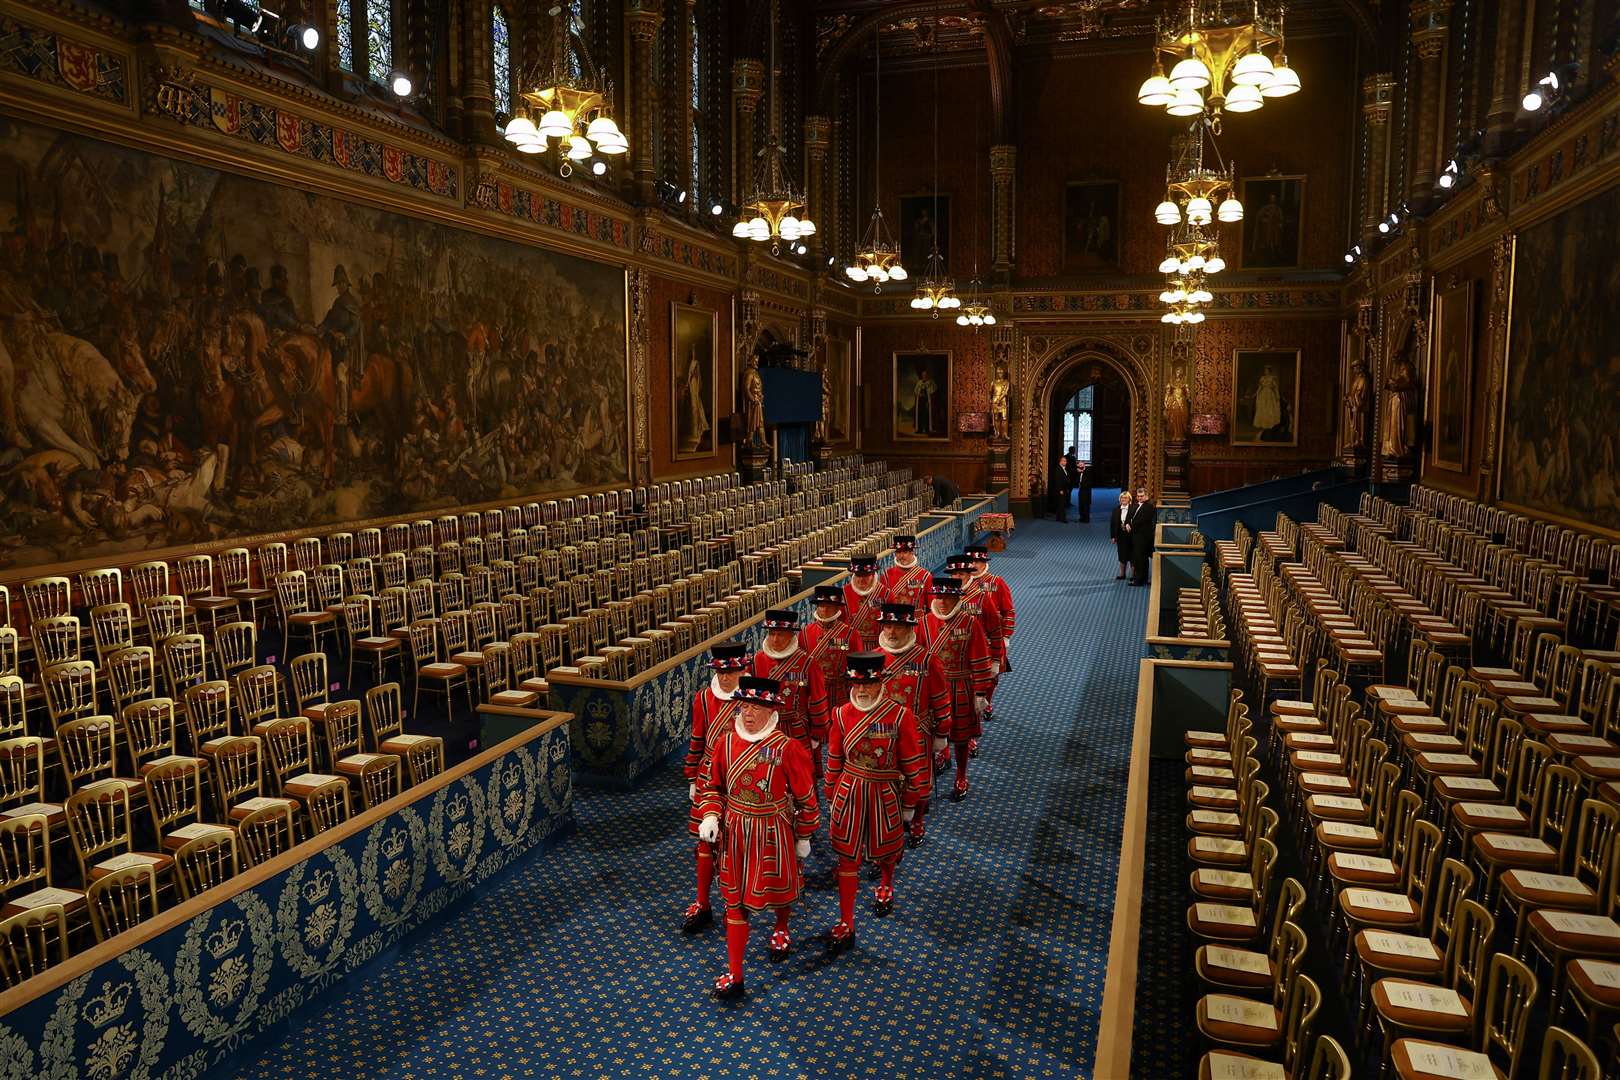 Yeomen of the Guard, wearing traditional uniform, walk through the Royal Gallery during the ceremonial search before the State Opening of Parliament in the House of Lords (Hannah McKay/PA)